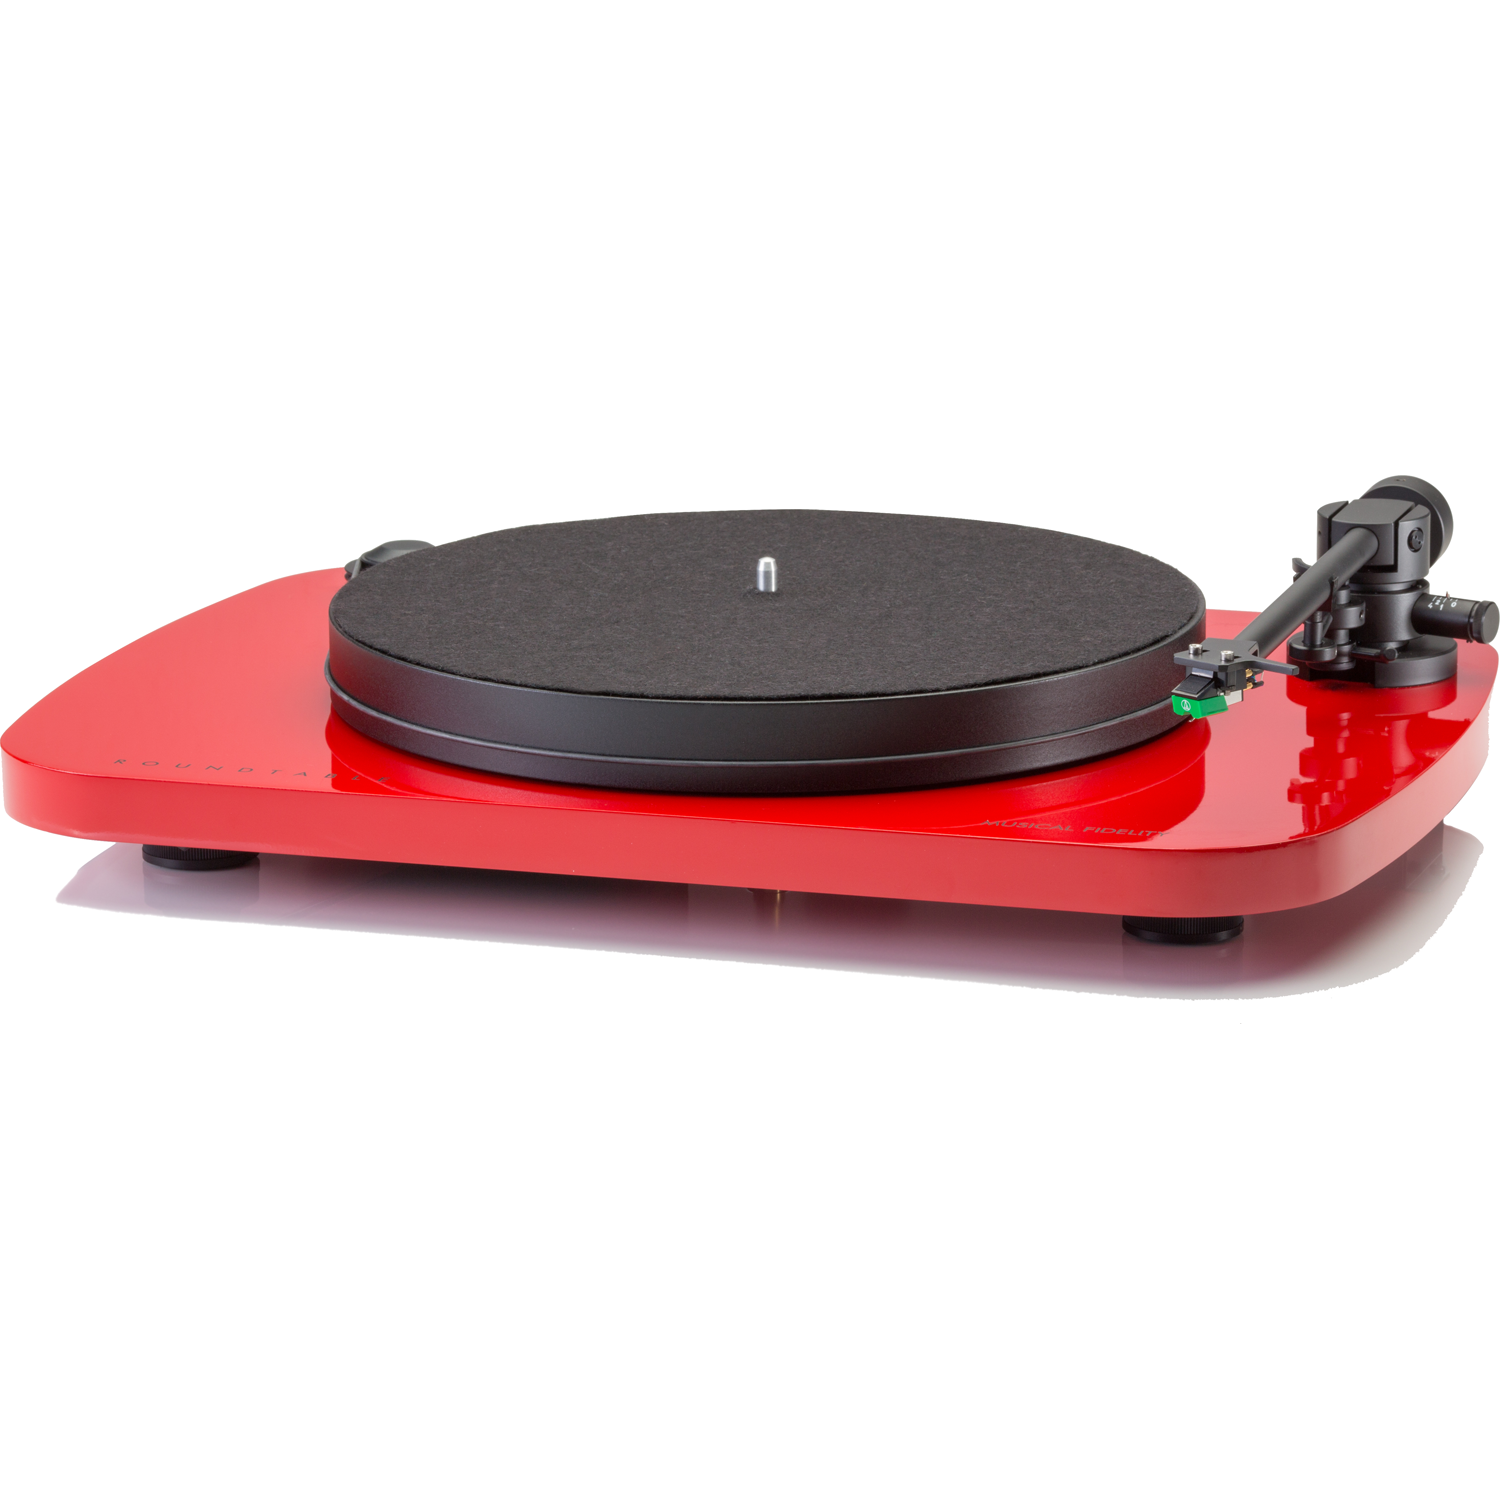 MUSICAL FIDELITY The Roundtable Turntable Red